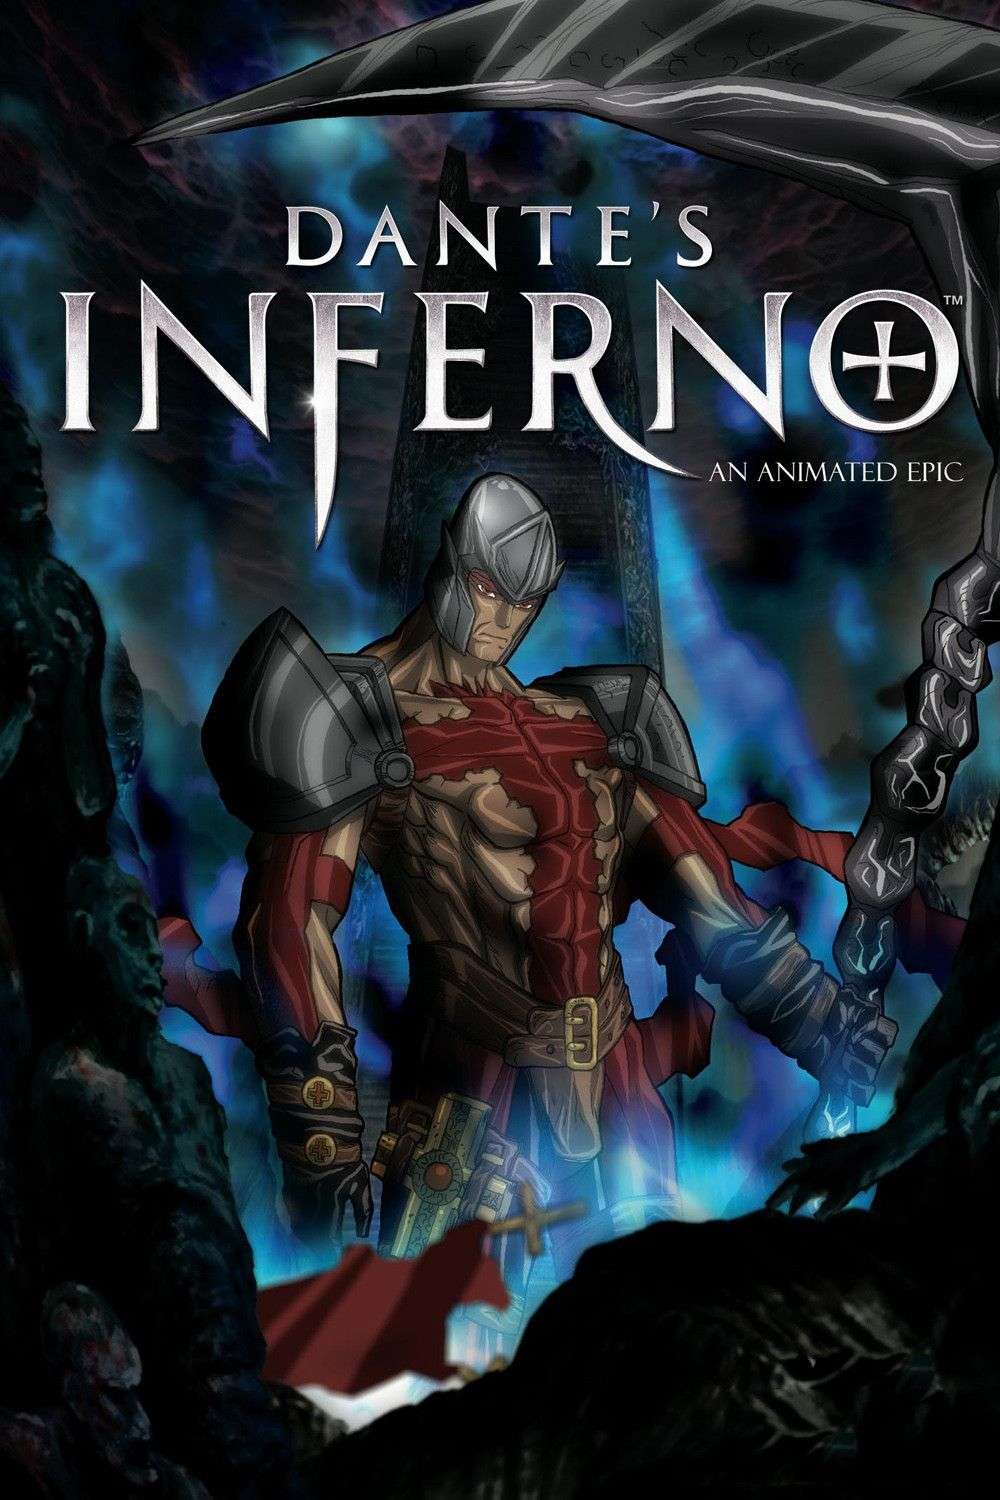 Dante's Inferno An Animated Epic - Based on the Dante's Inferno Game